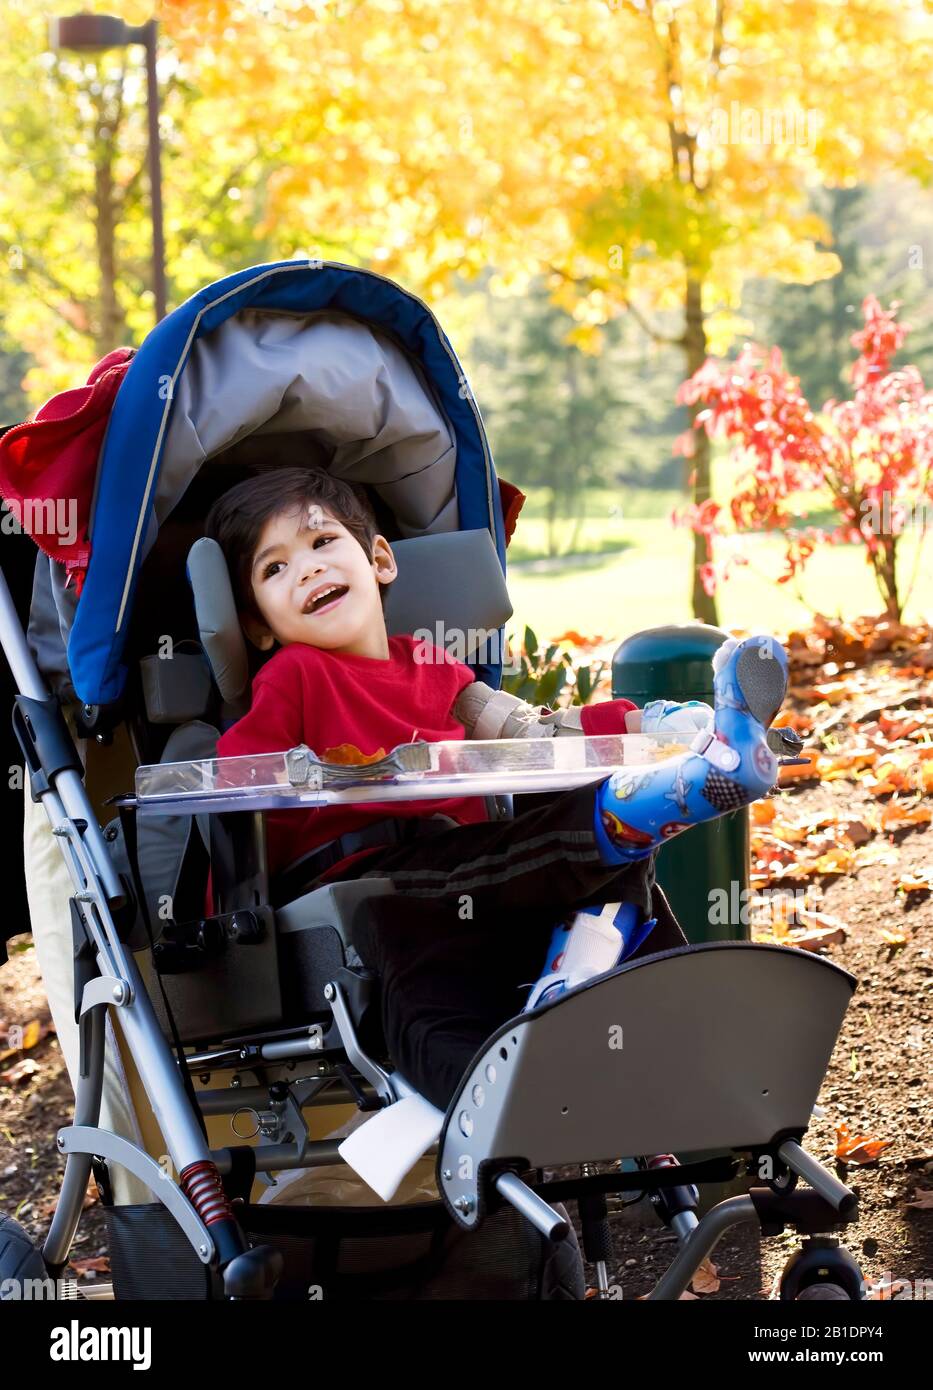 Handsome little disabled child sitting in wheelchair at park on sunny day outdoors with colorful yellow leaves on trees in background Stock Photo